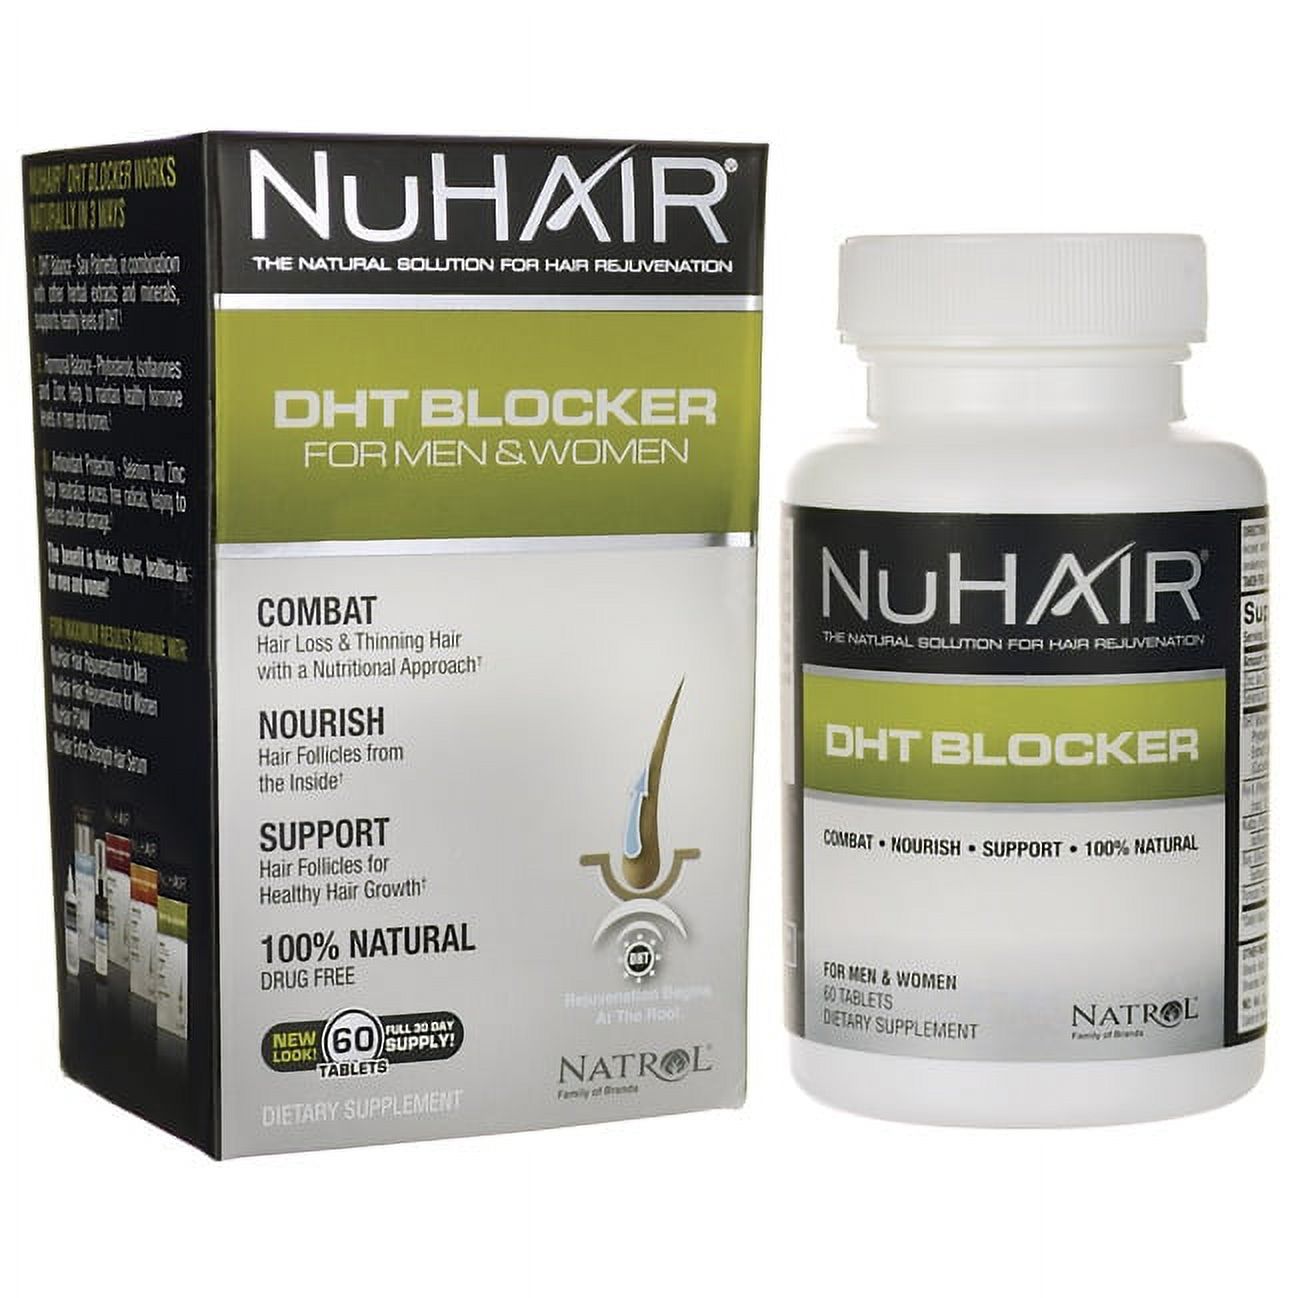 NuHair DHT Blocker for Men and Women, Hair Loss Treatment, 60 Tablets - image 1 of 2